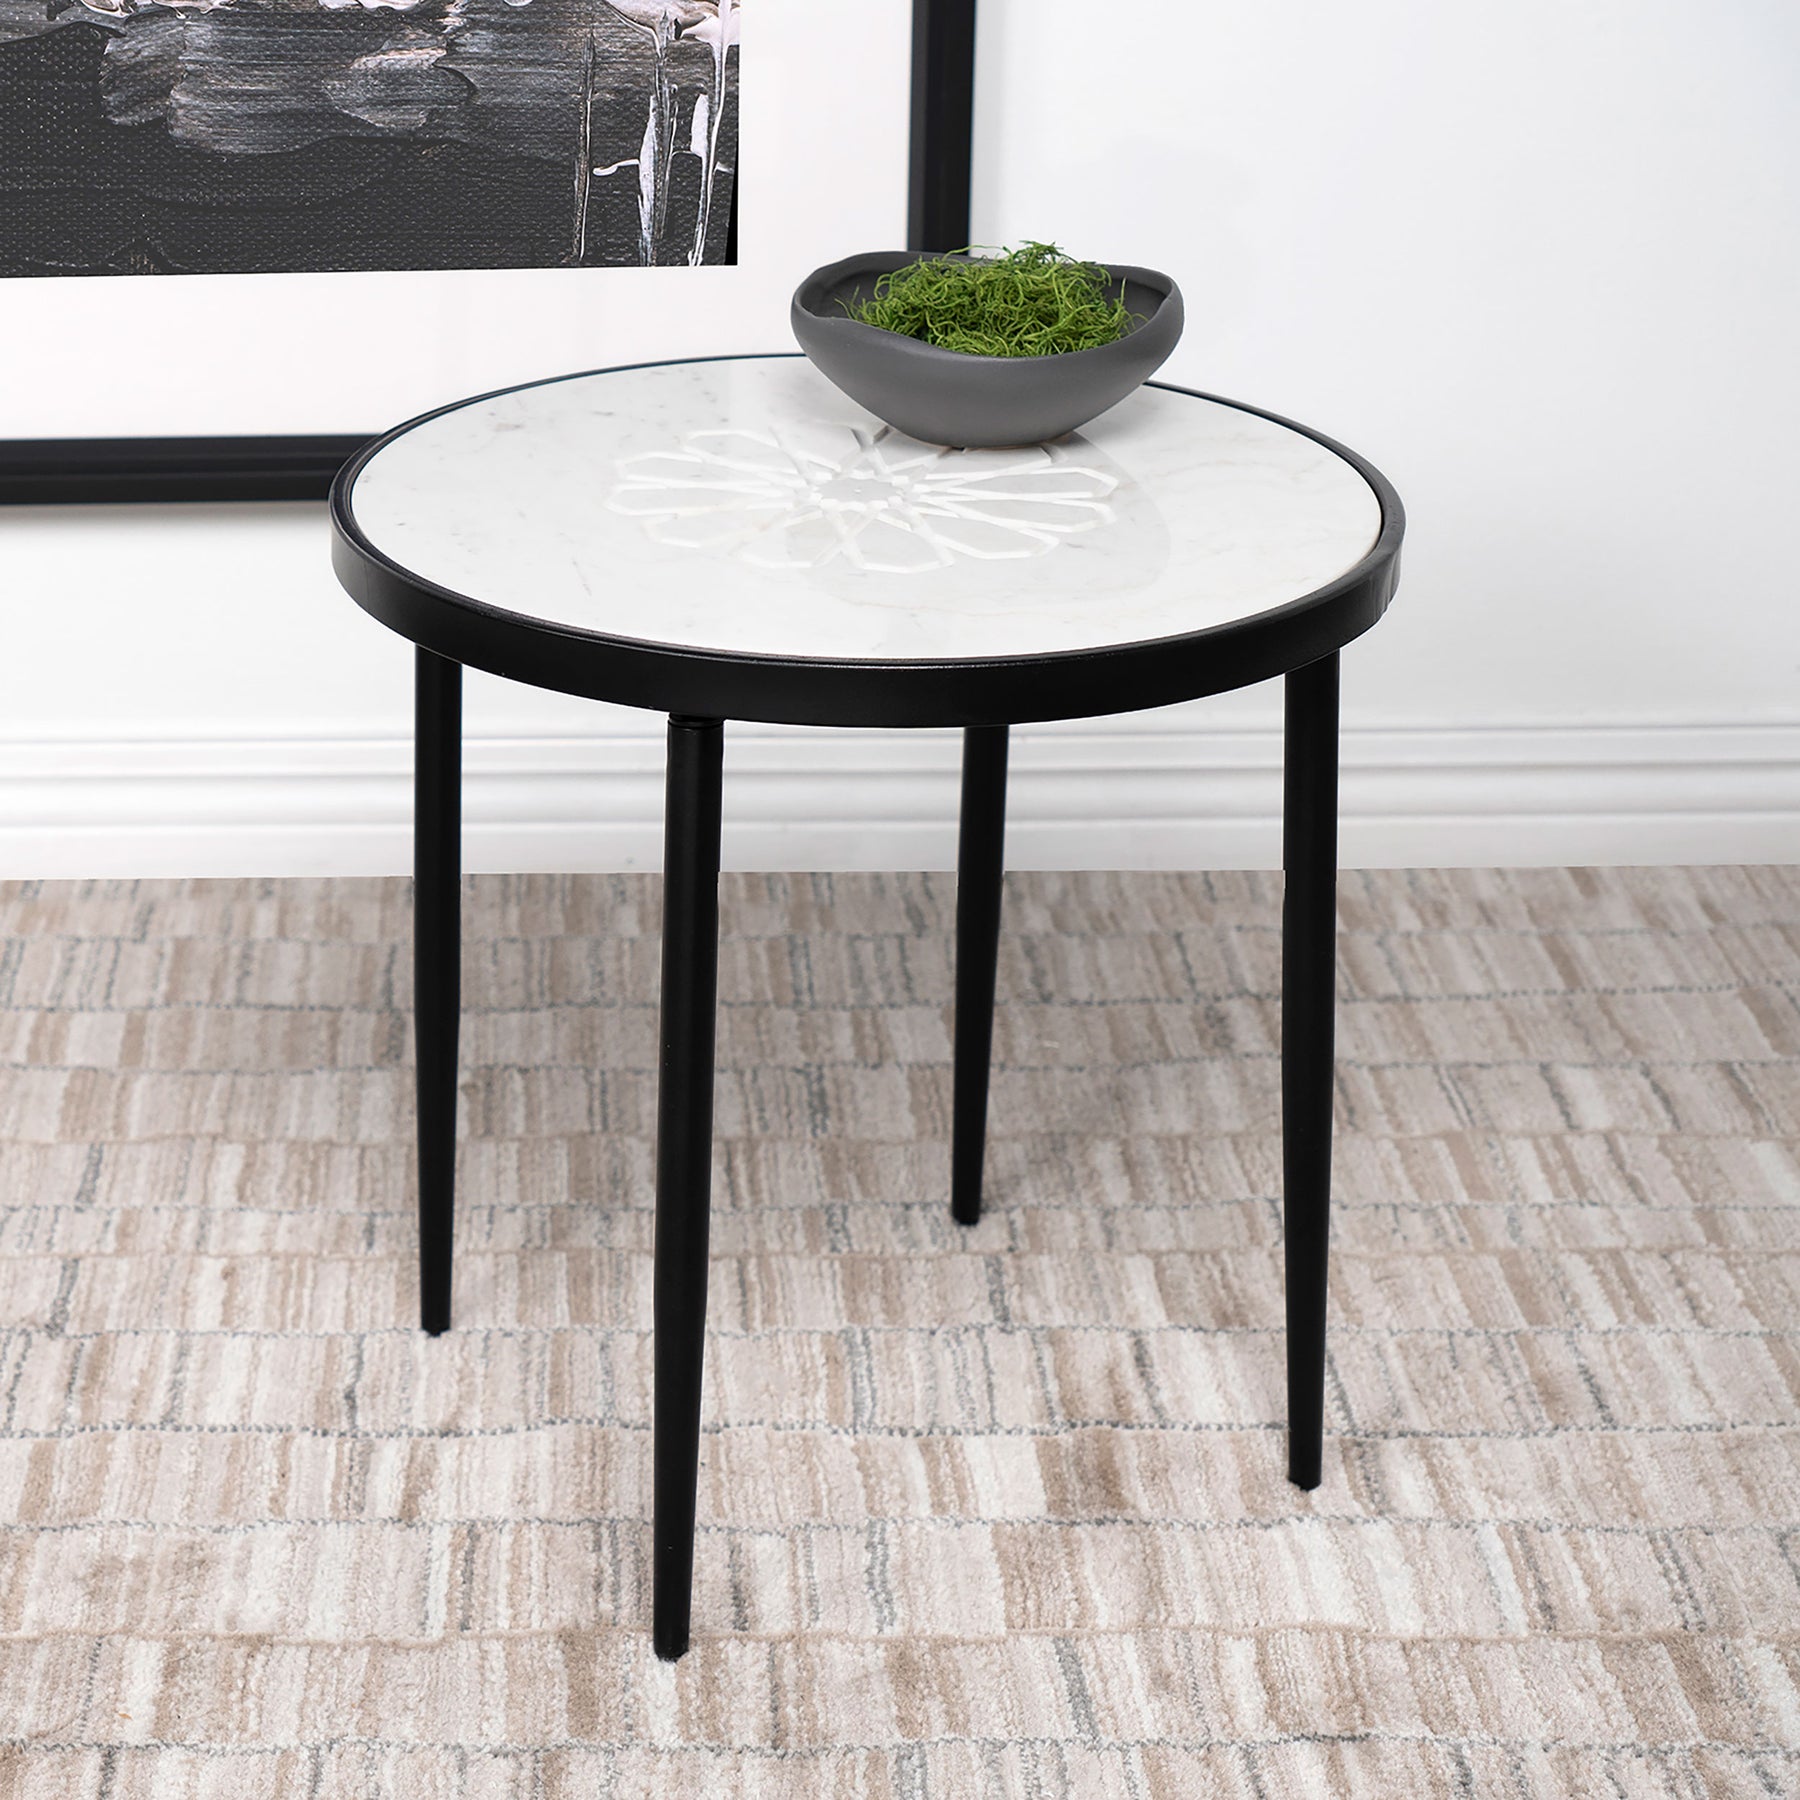 Kofi Round Marble Top Side Table White and Black Kofi Round Marble Top Side Table White and Black Half Price Furniture